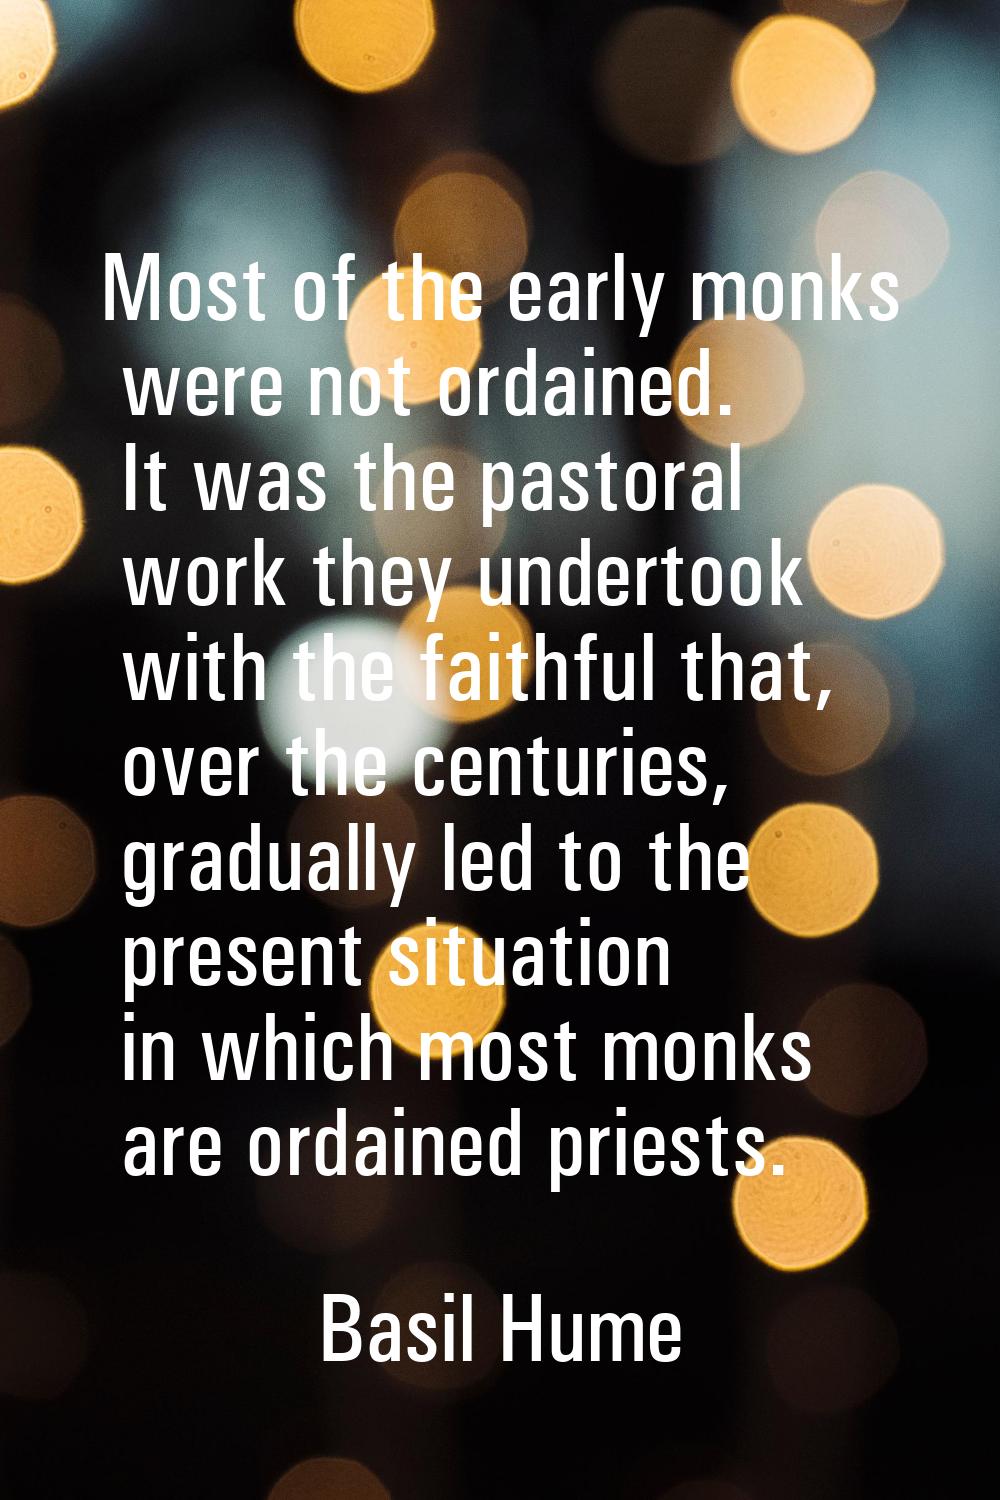 Most of the early monks were not ordained. It was the pastoral work they undertook with the faithfu